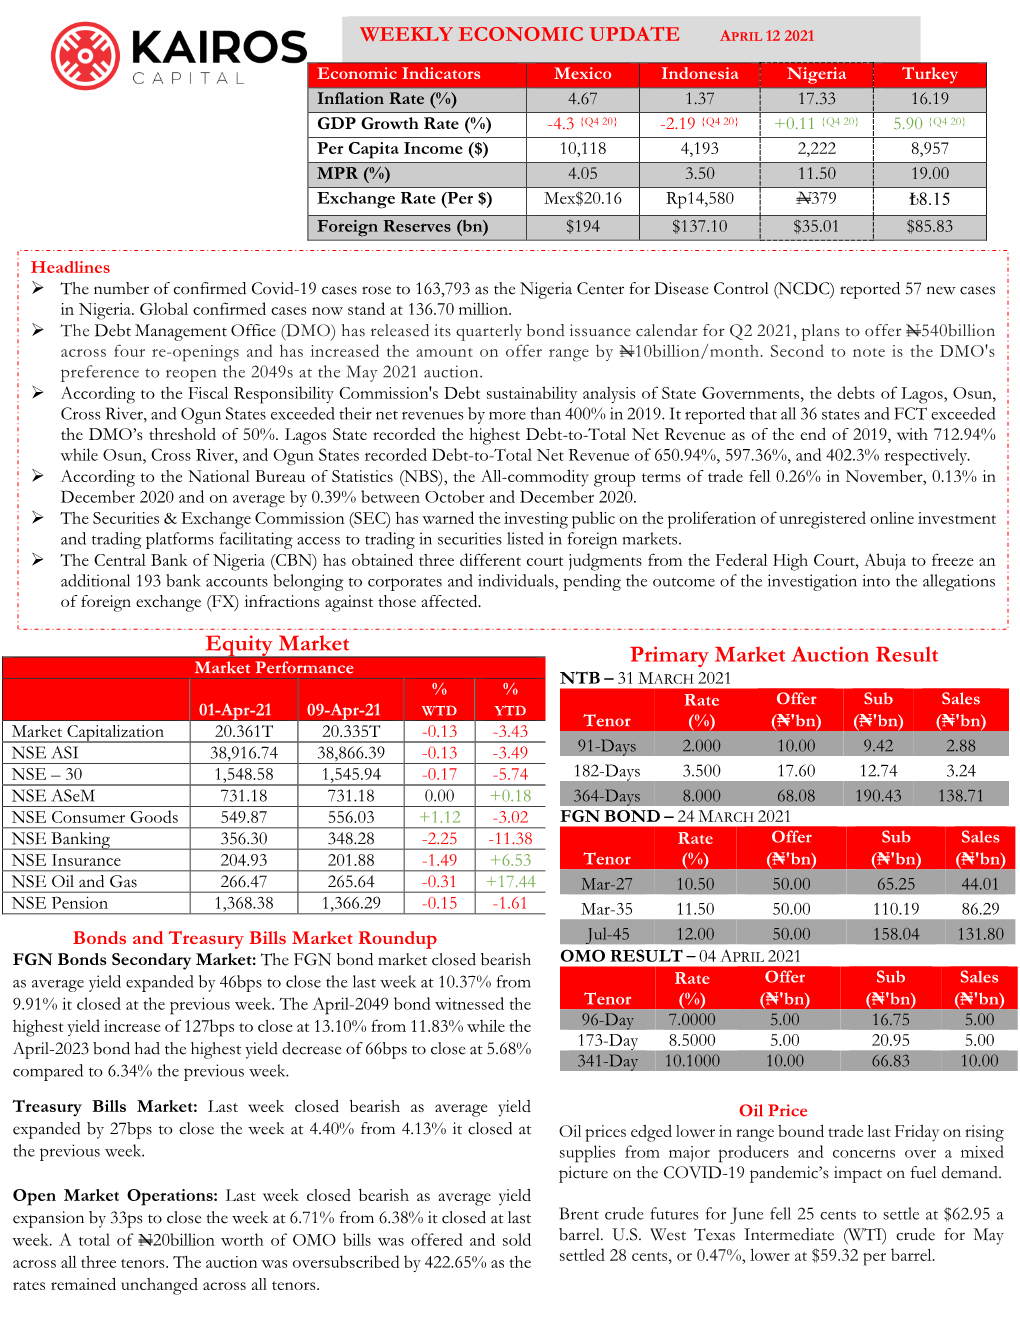 Primary Market Auction Result Equity Market